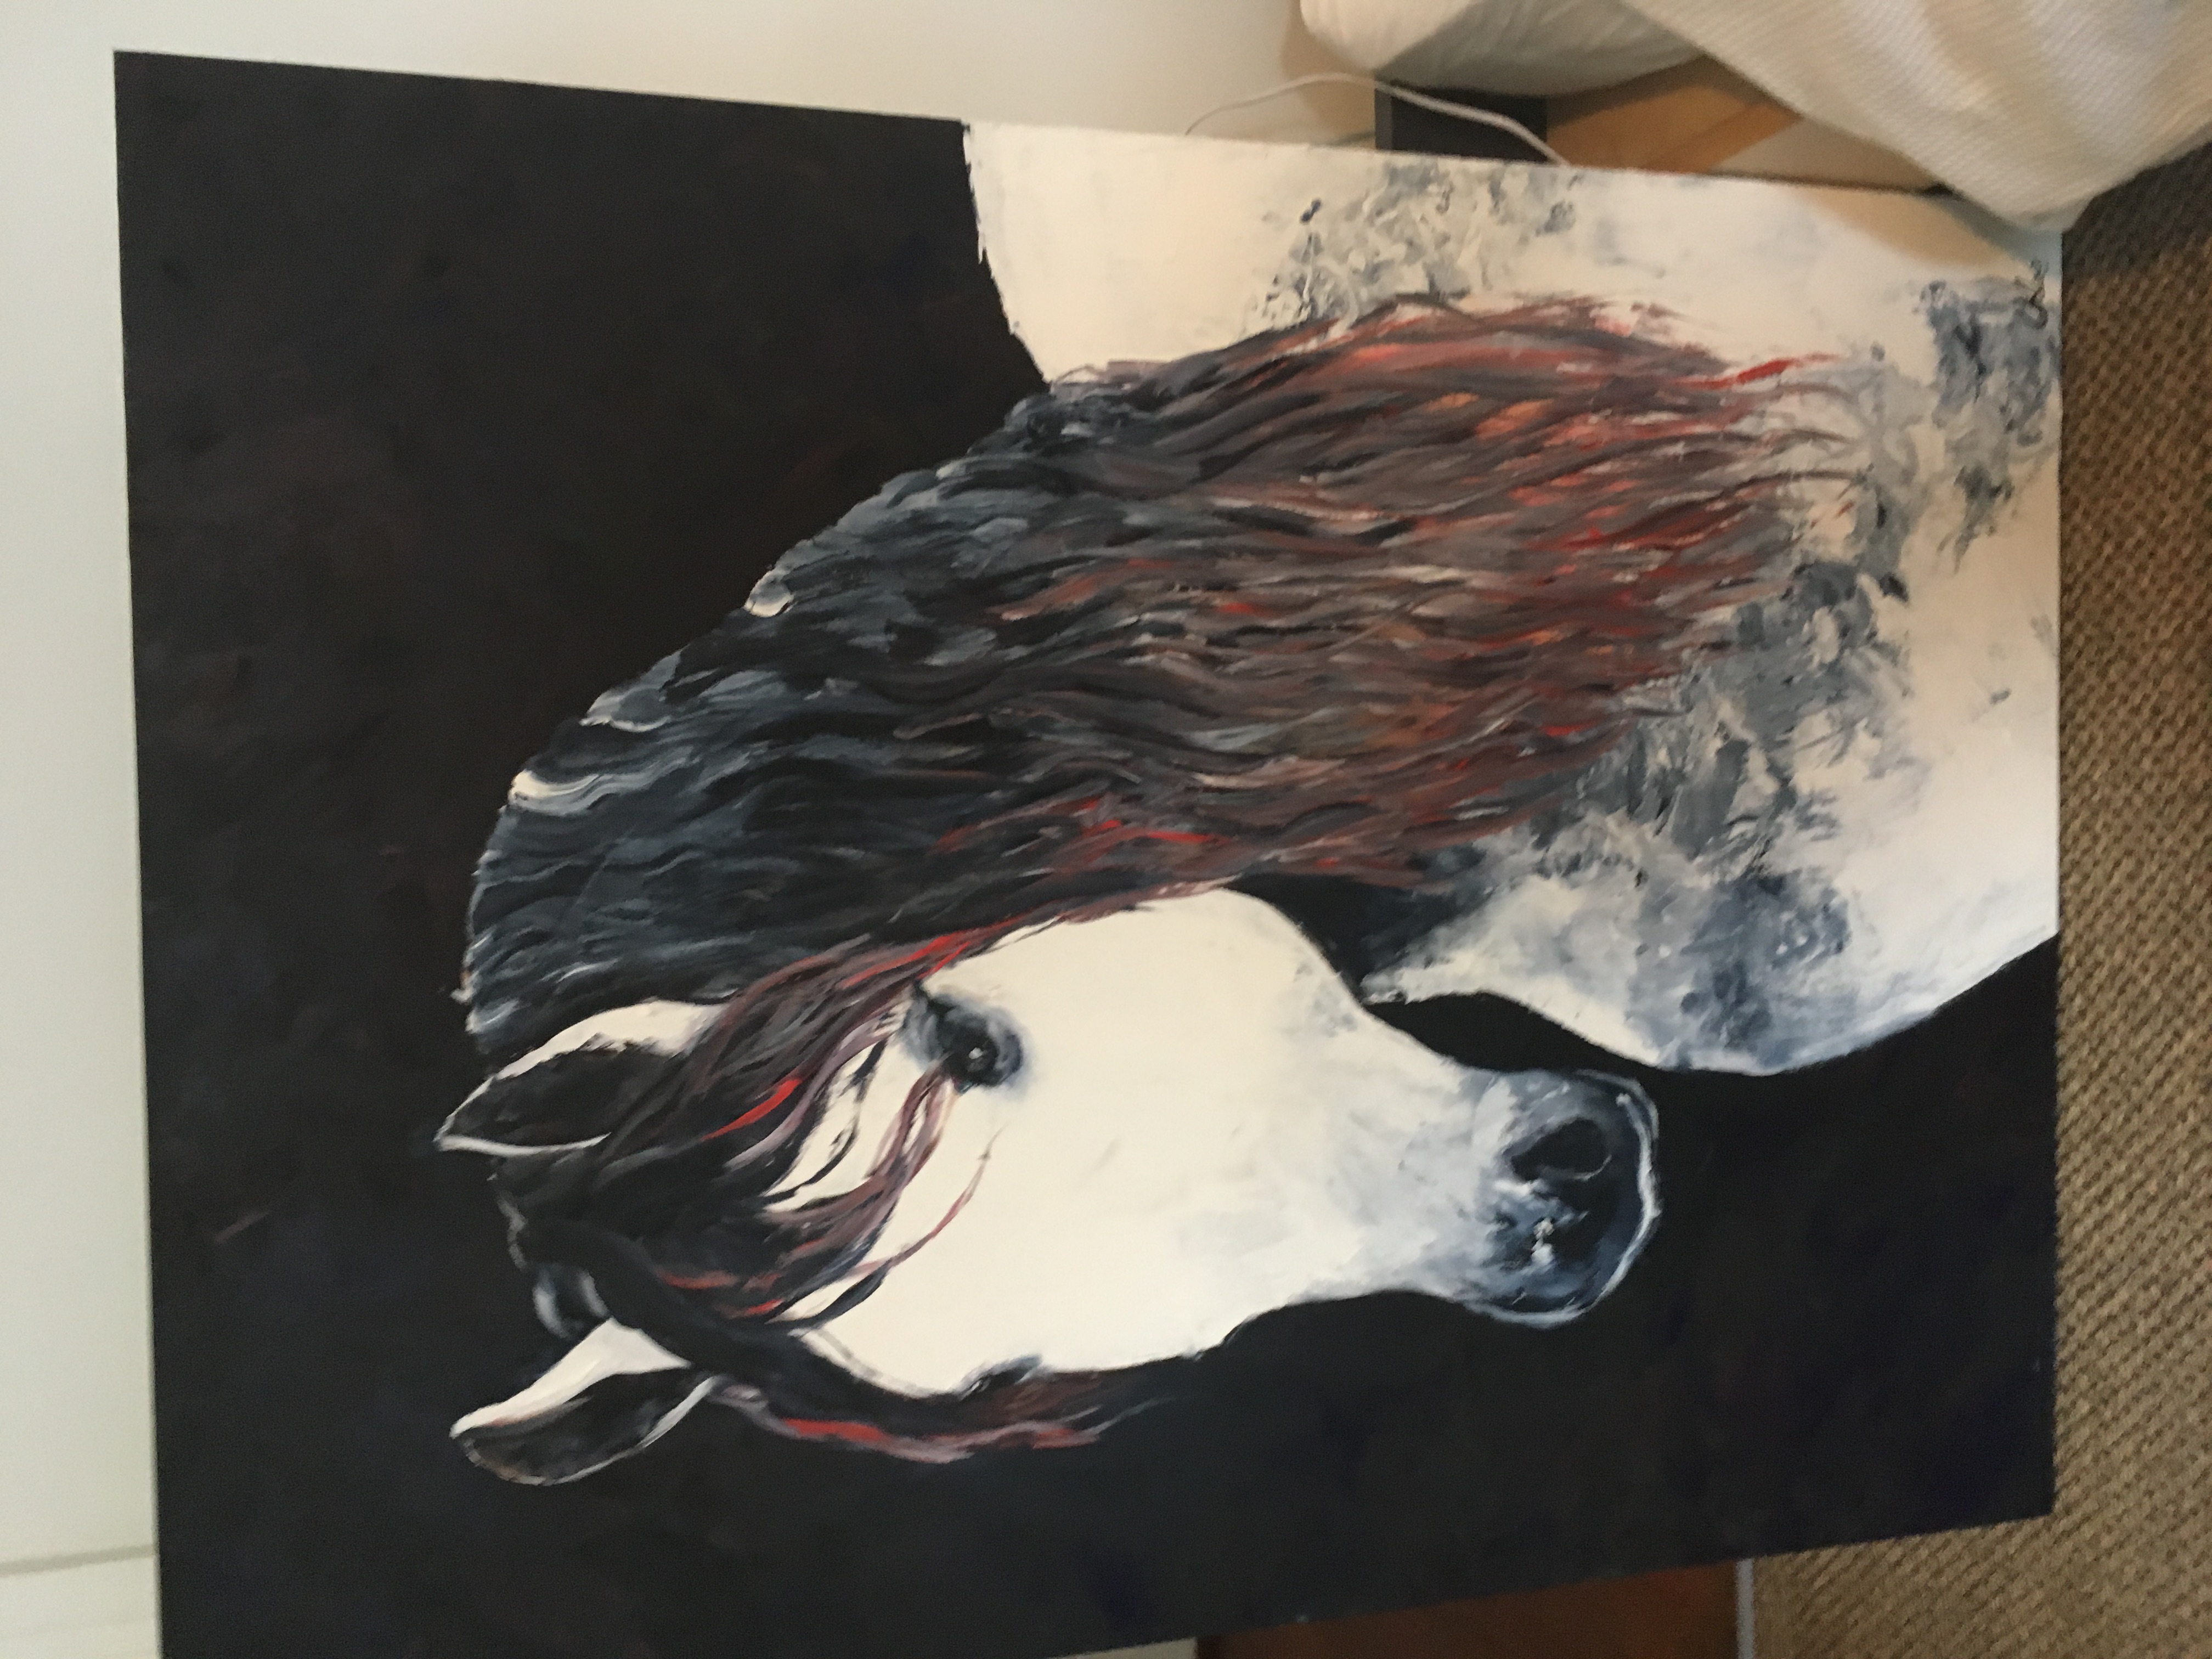 Horse On Canvas 